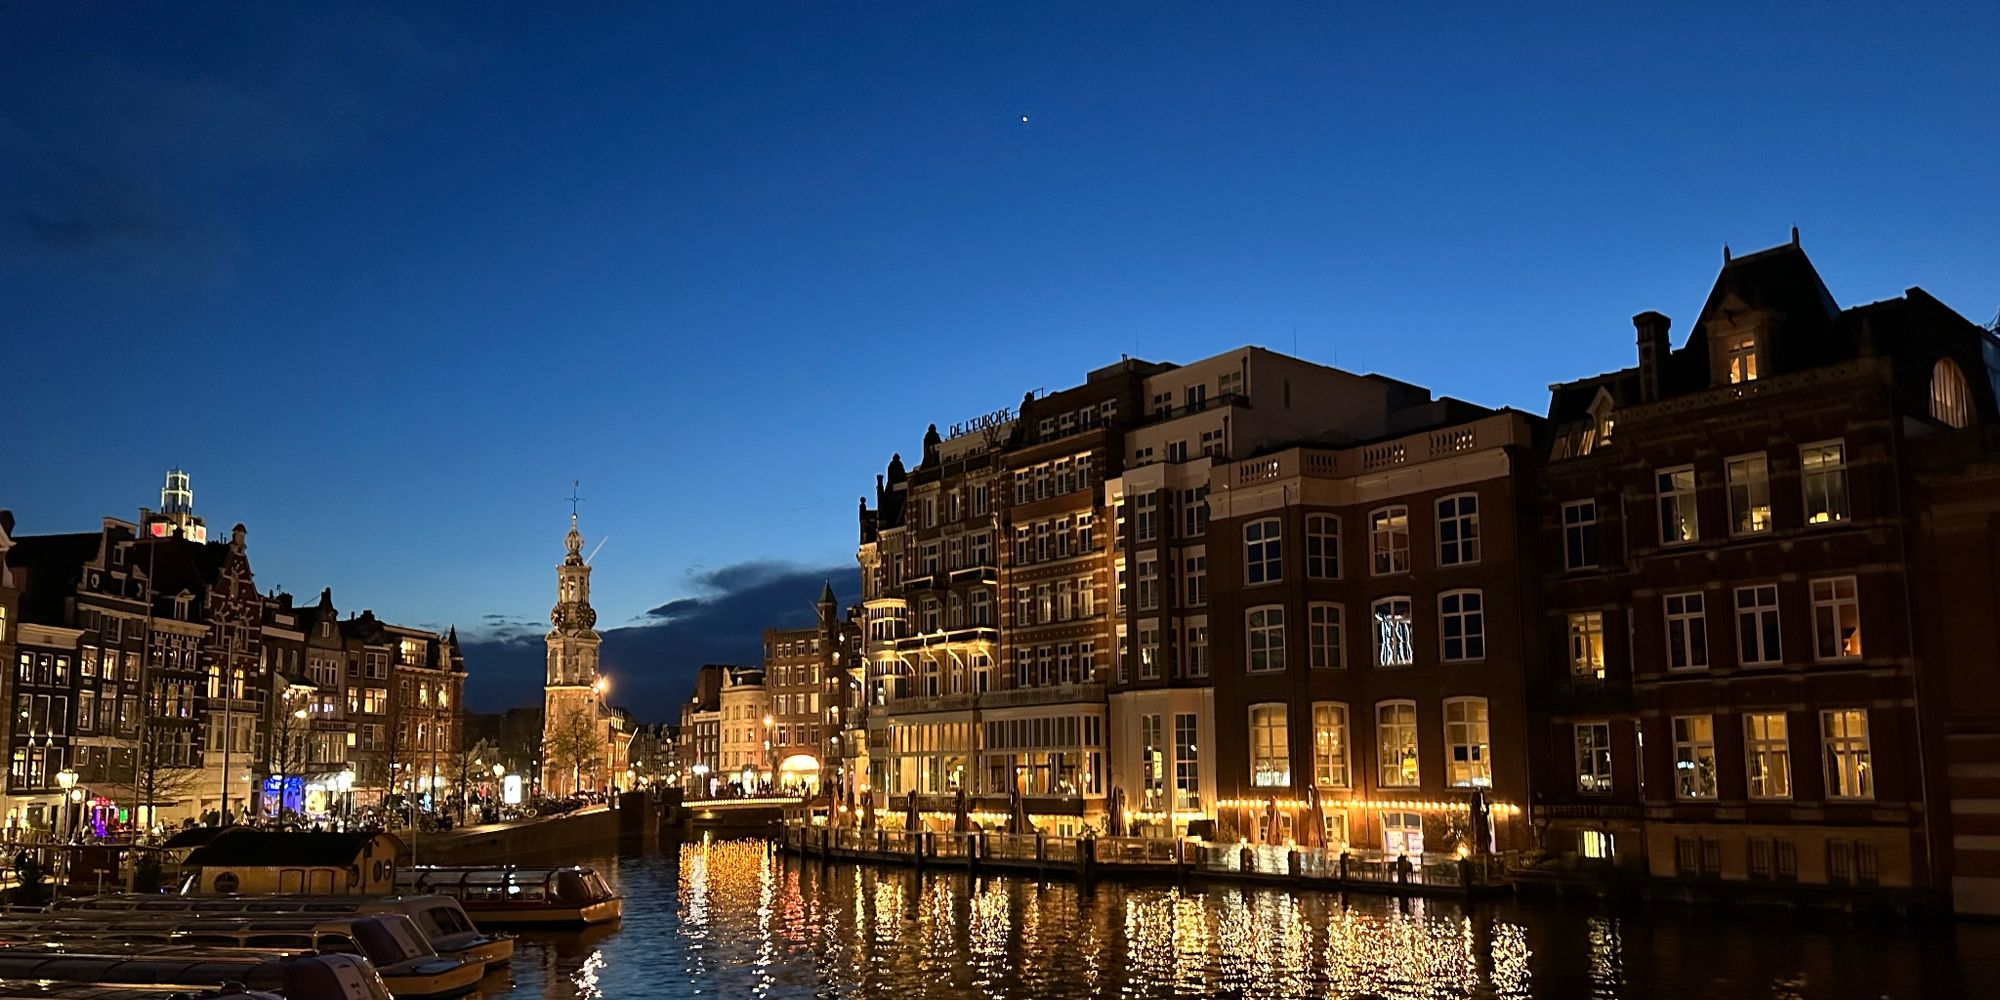 View of Amsterdam at night. Photo by Thomas Vitale.